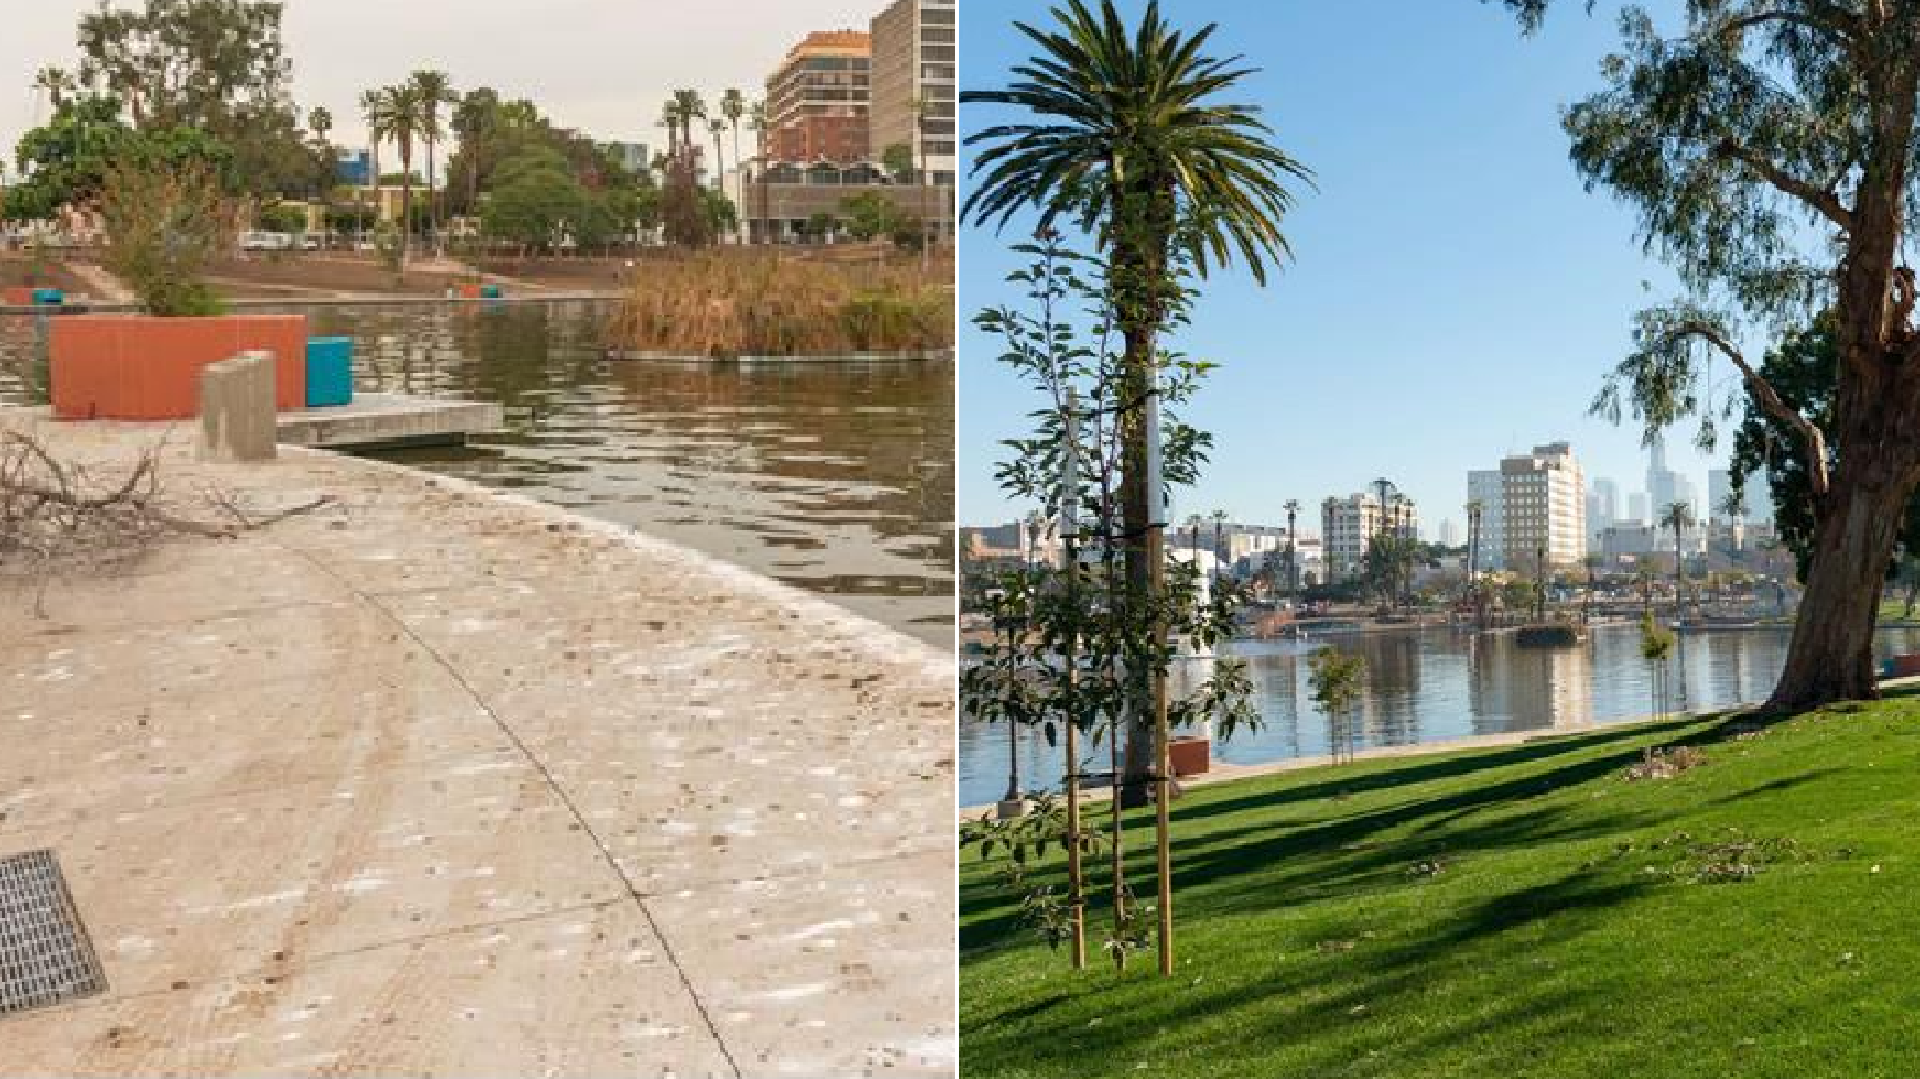 Macarthur Park Reopens After Closure For Cleanup And Renovations